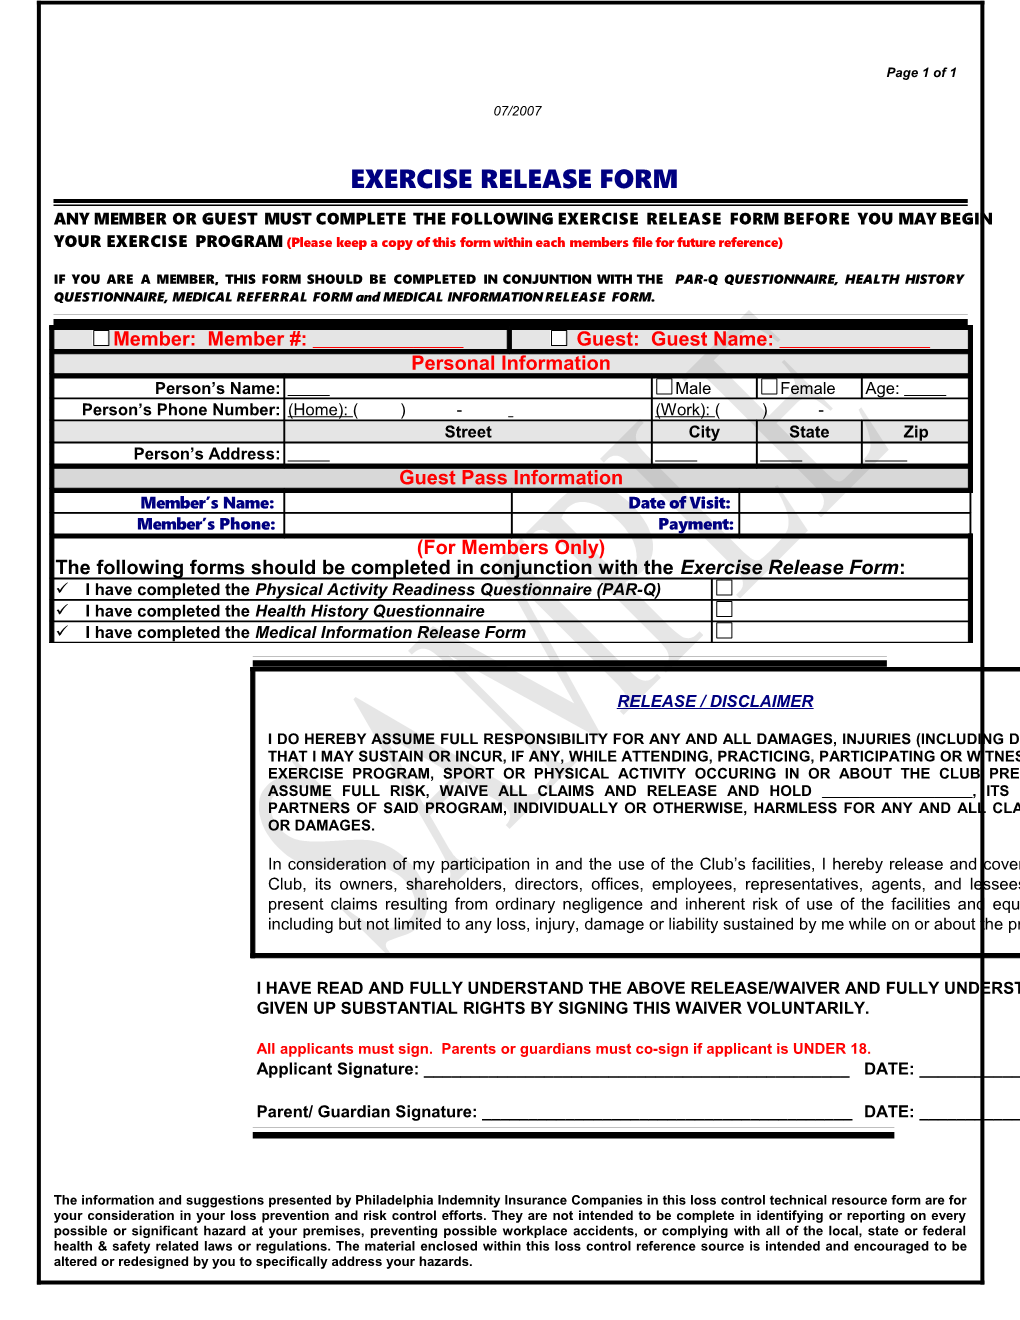 Exercise Release Form